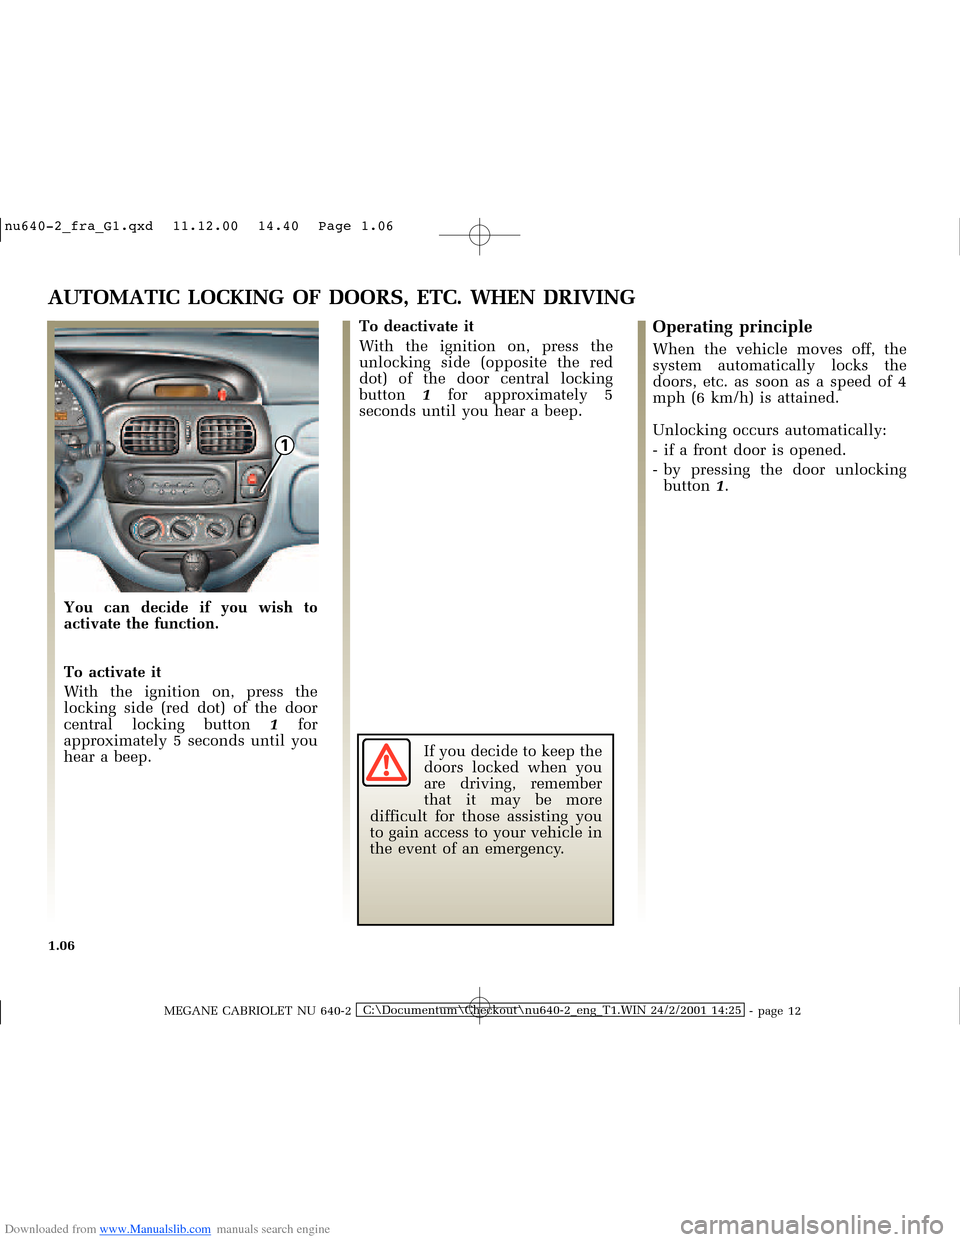 RENAULT MEGANE 2000 X64 / 1.G Owners Manual Downloaded from www.Manualslib.com manuals search engine 1
�Q�X������B�I�U�D�B�*���T�[�G� � ��������� � ������ � �3�D�J�H� ����
MEGANE CABRIOLET NU 640-2C:\Documentum\Ch